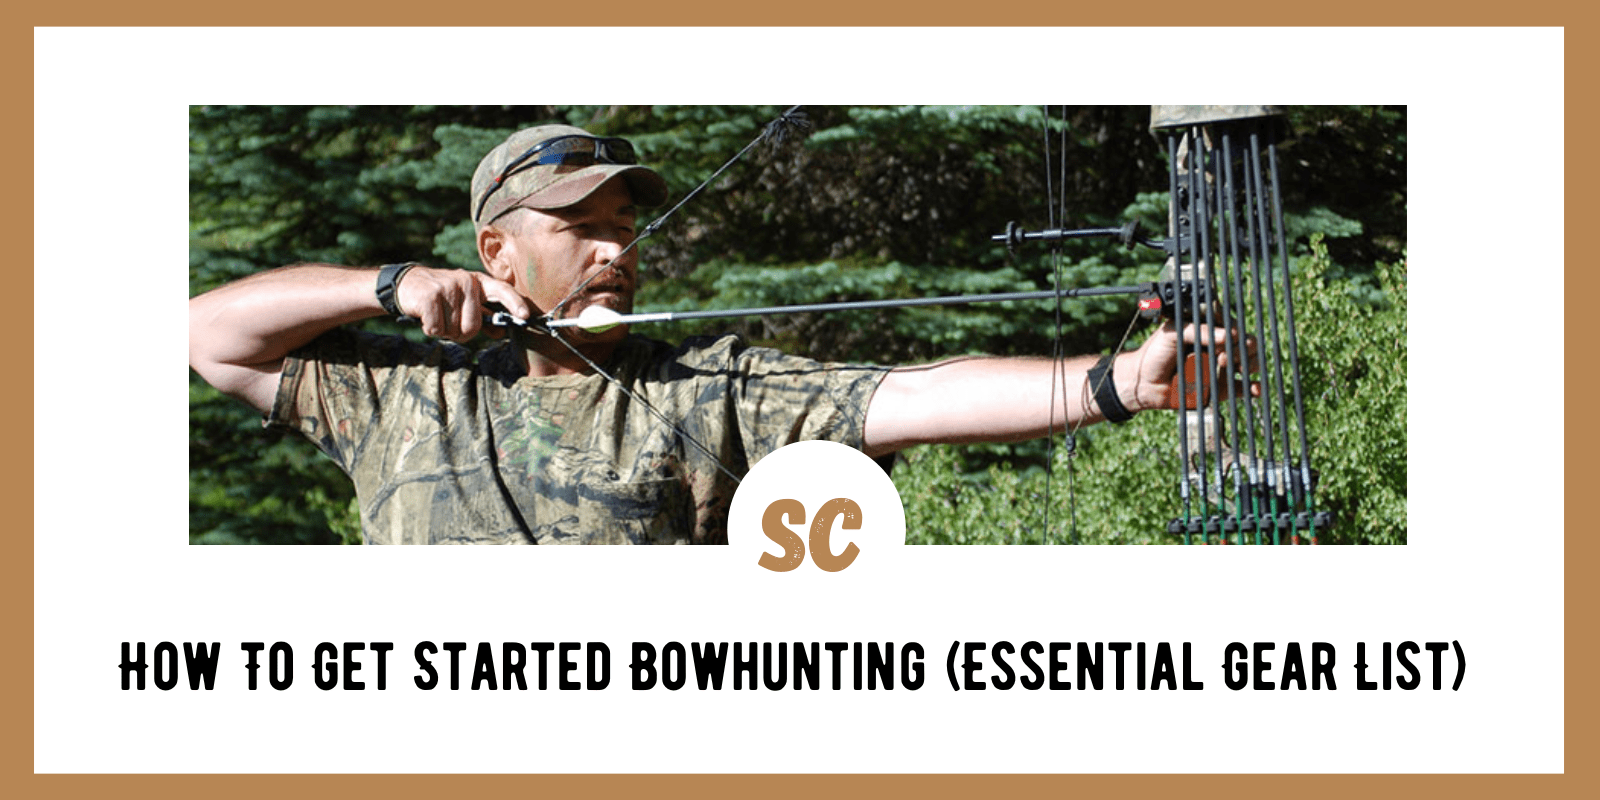 Beginners Guide: How To Get Started Bowhunting (Essential Gear List)